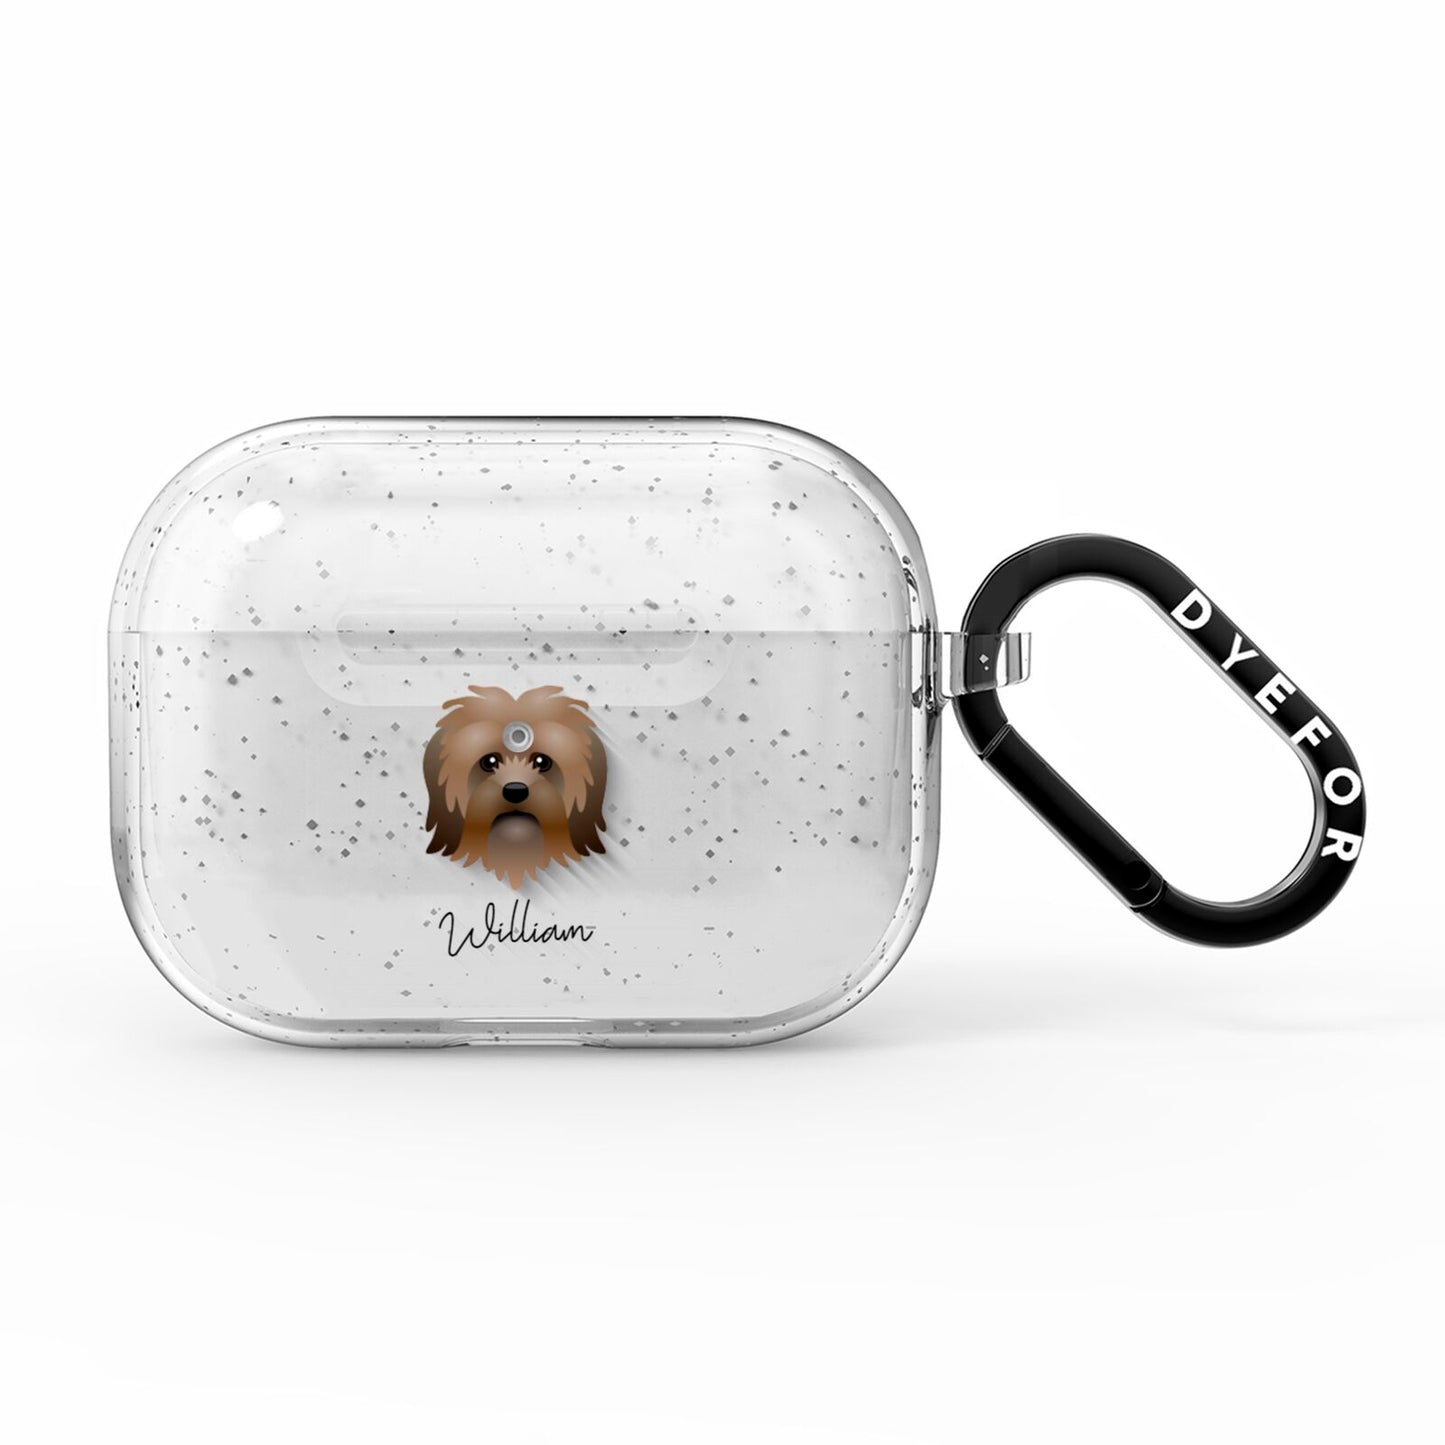 Lo wchen Personalised AirPods Pro Glitter Case